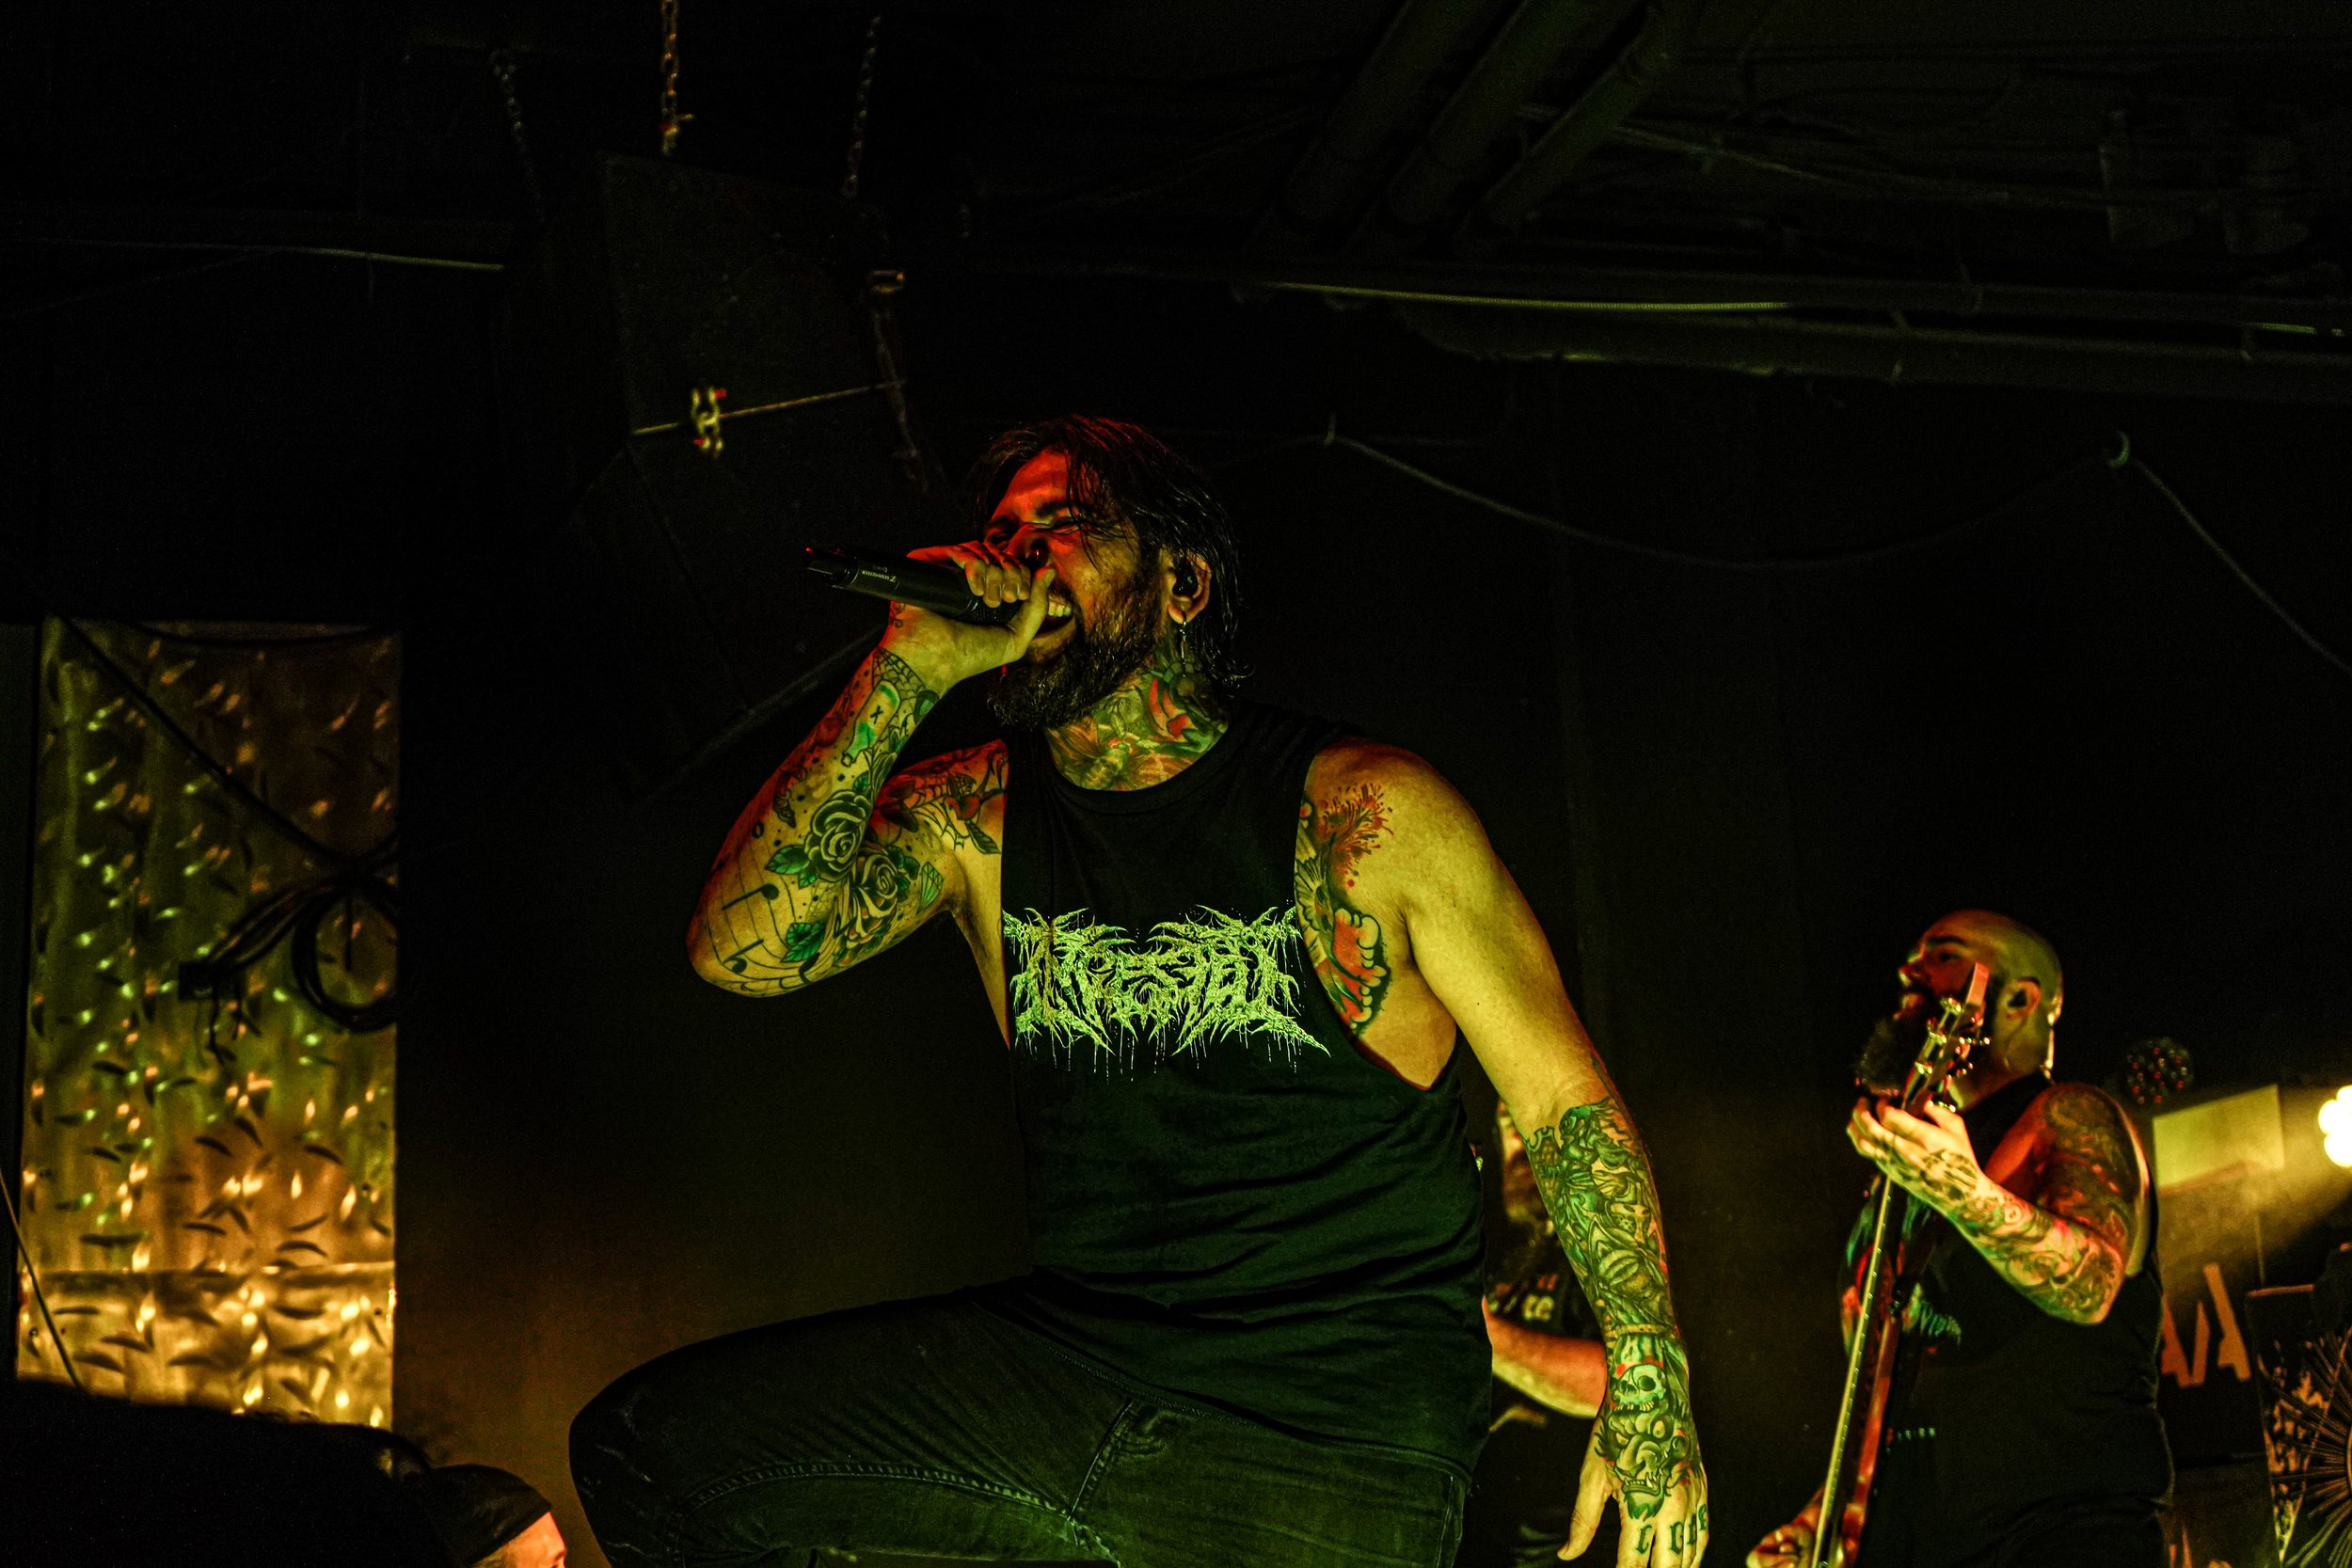 Fit For An Autopsy at The Masquerade